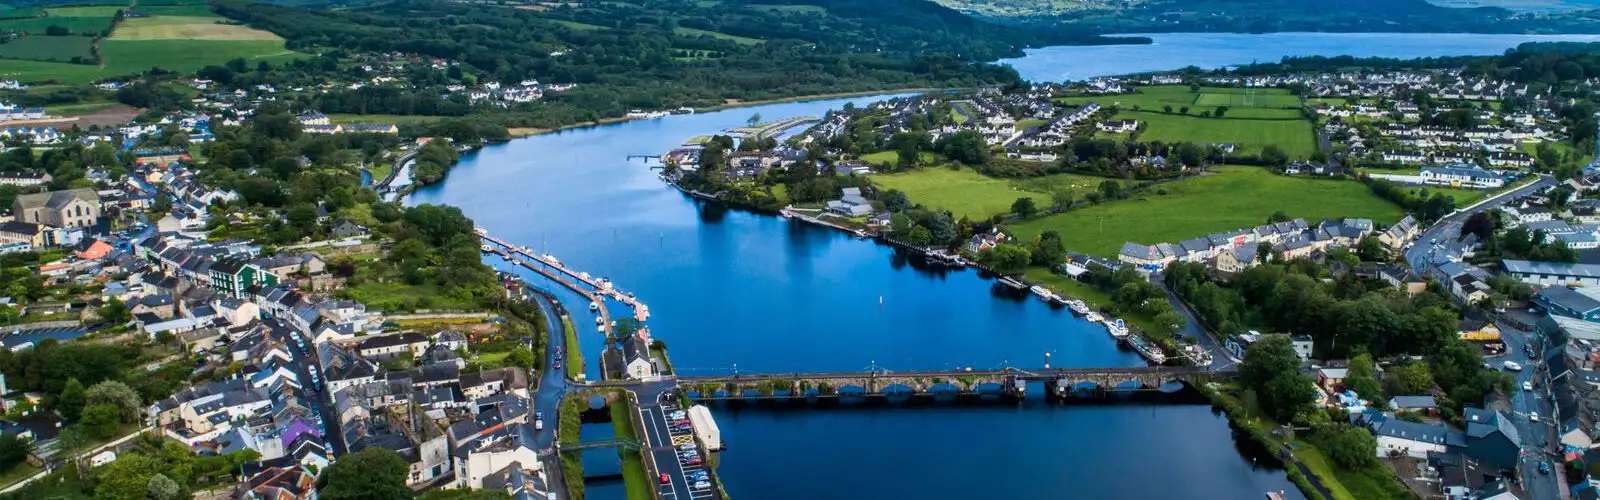 Local attractions and things to do in Killaloe